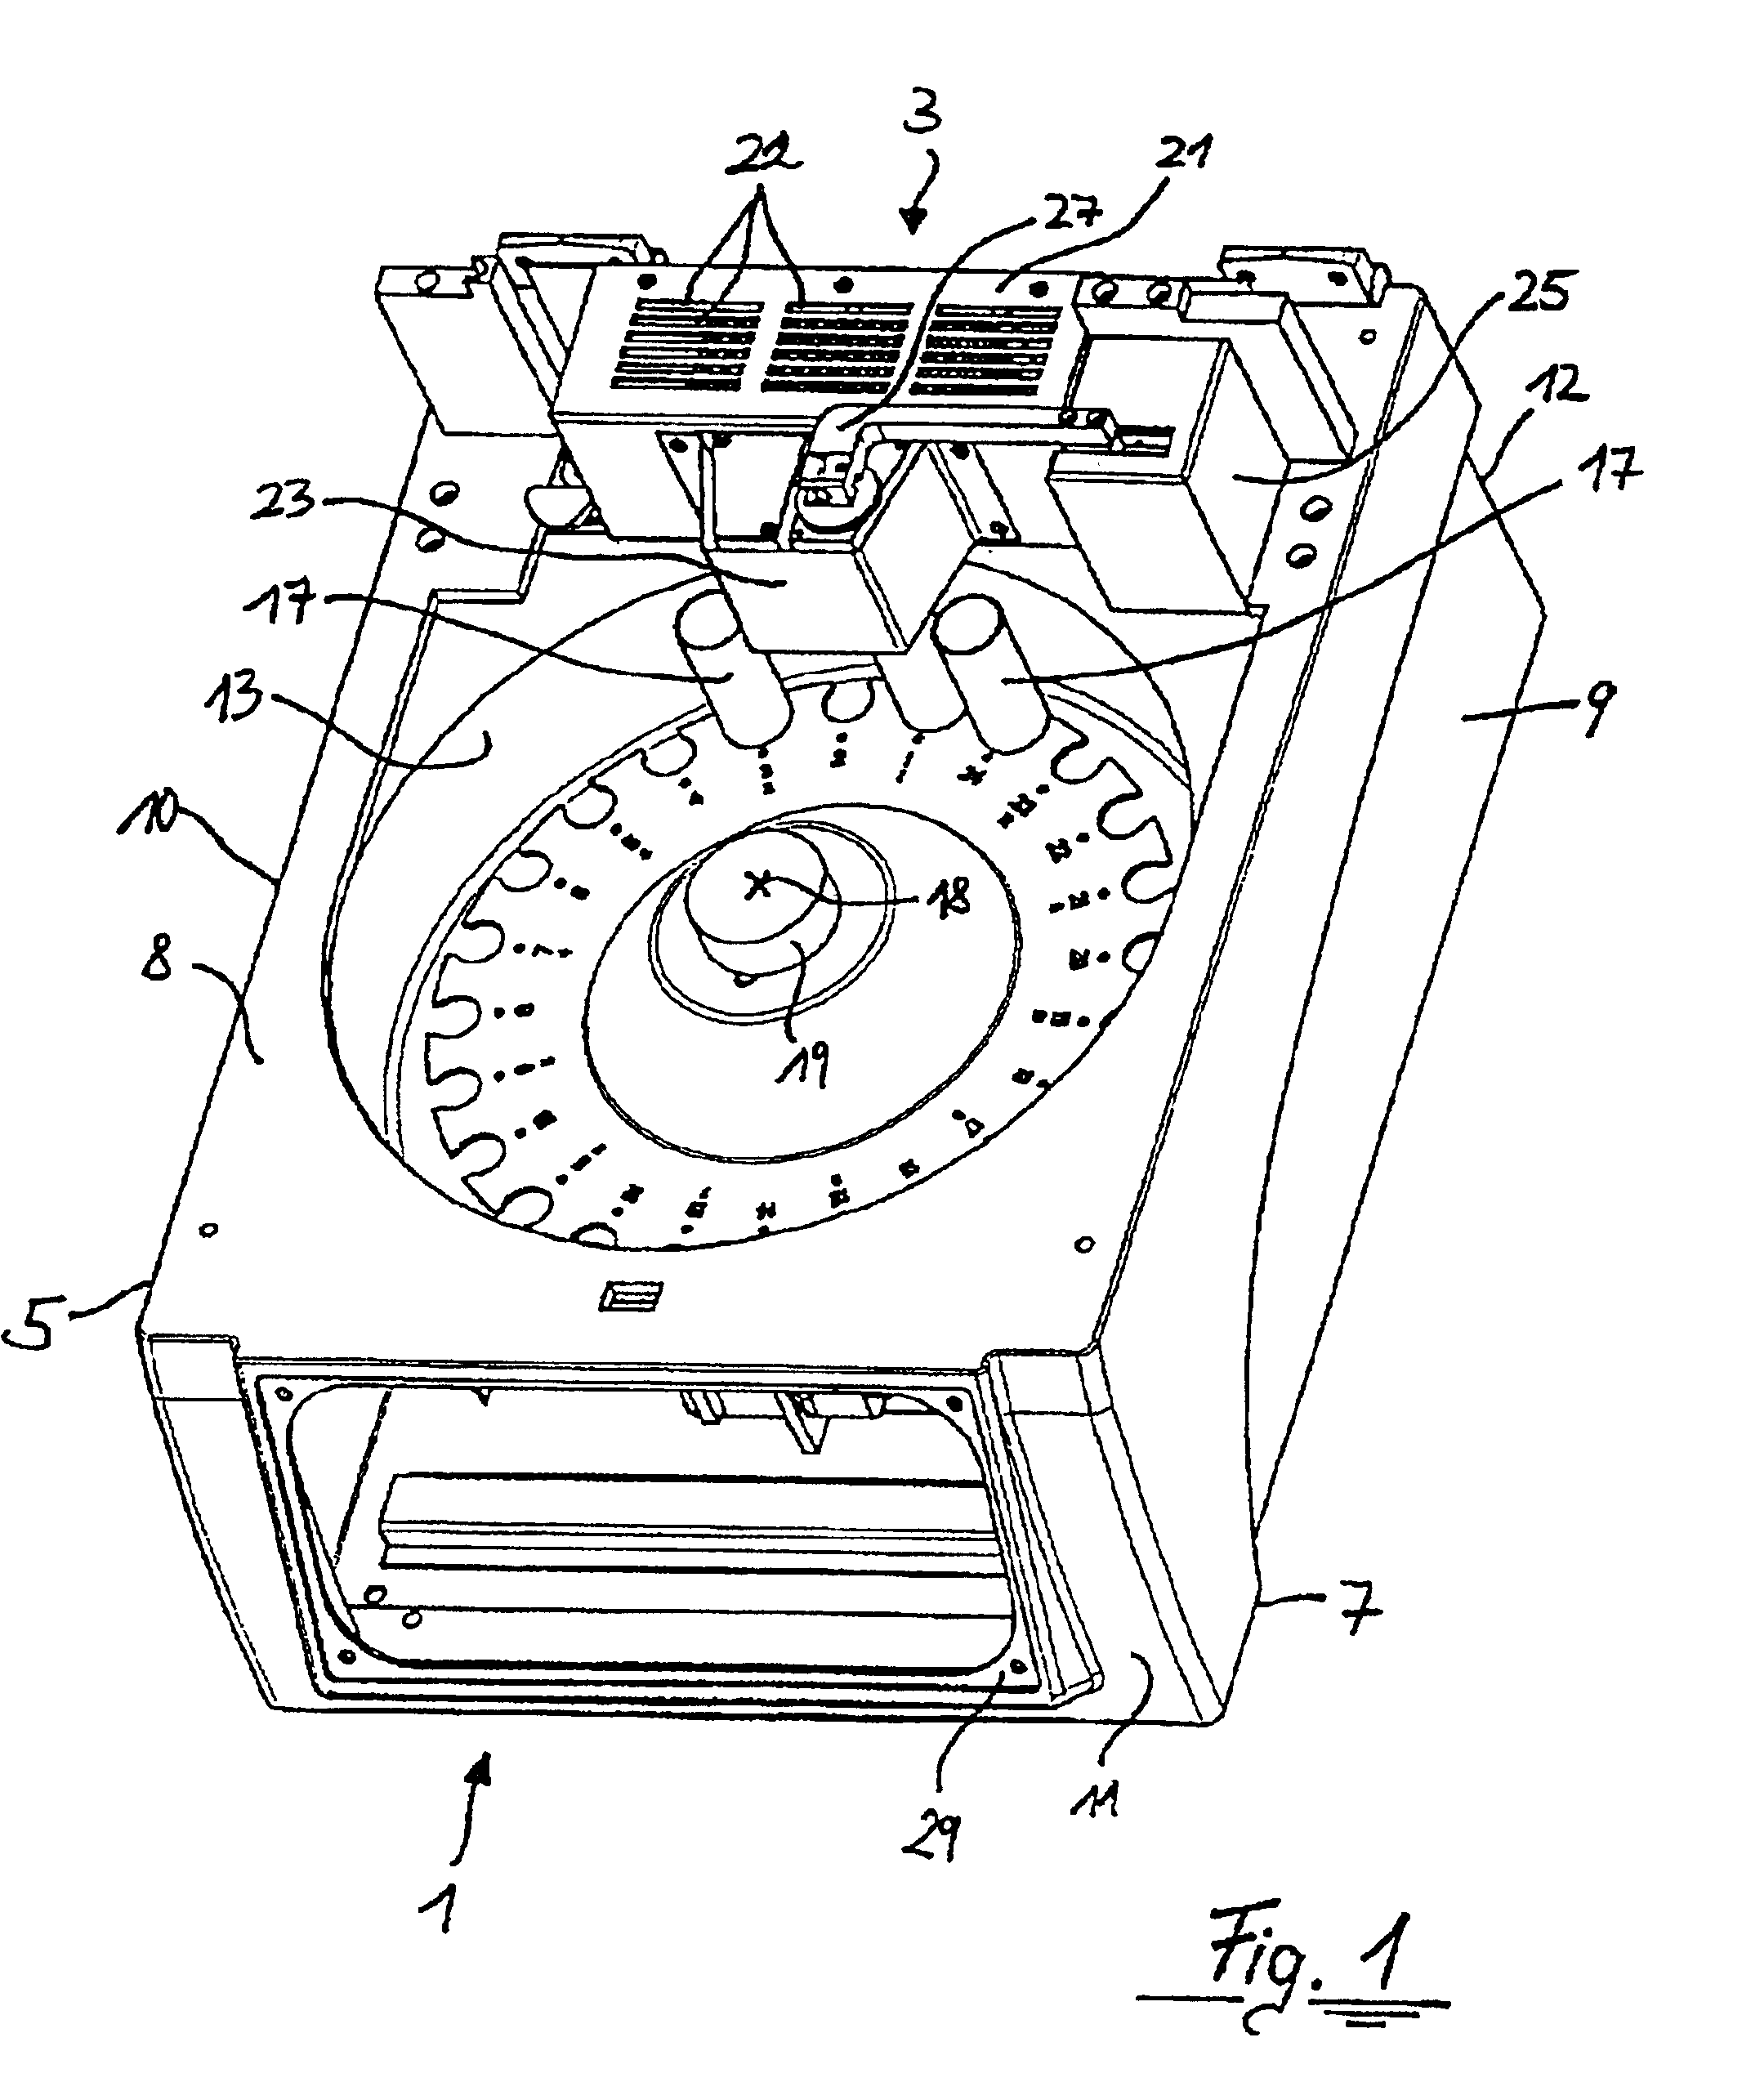 Heating and cooling device for an apparatus for tissue processing for the tissue embedding